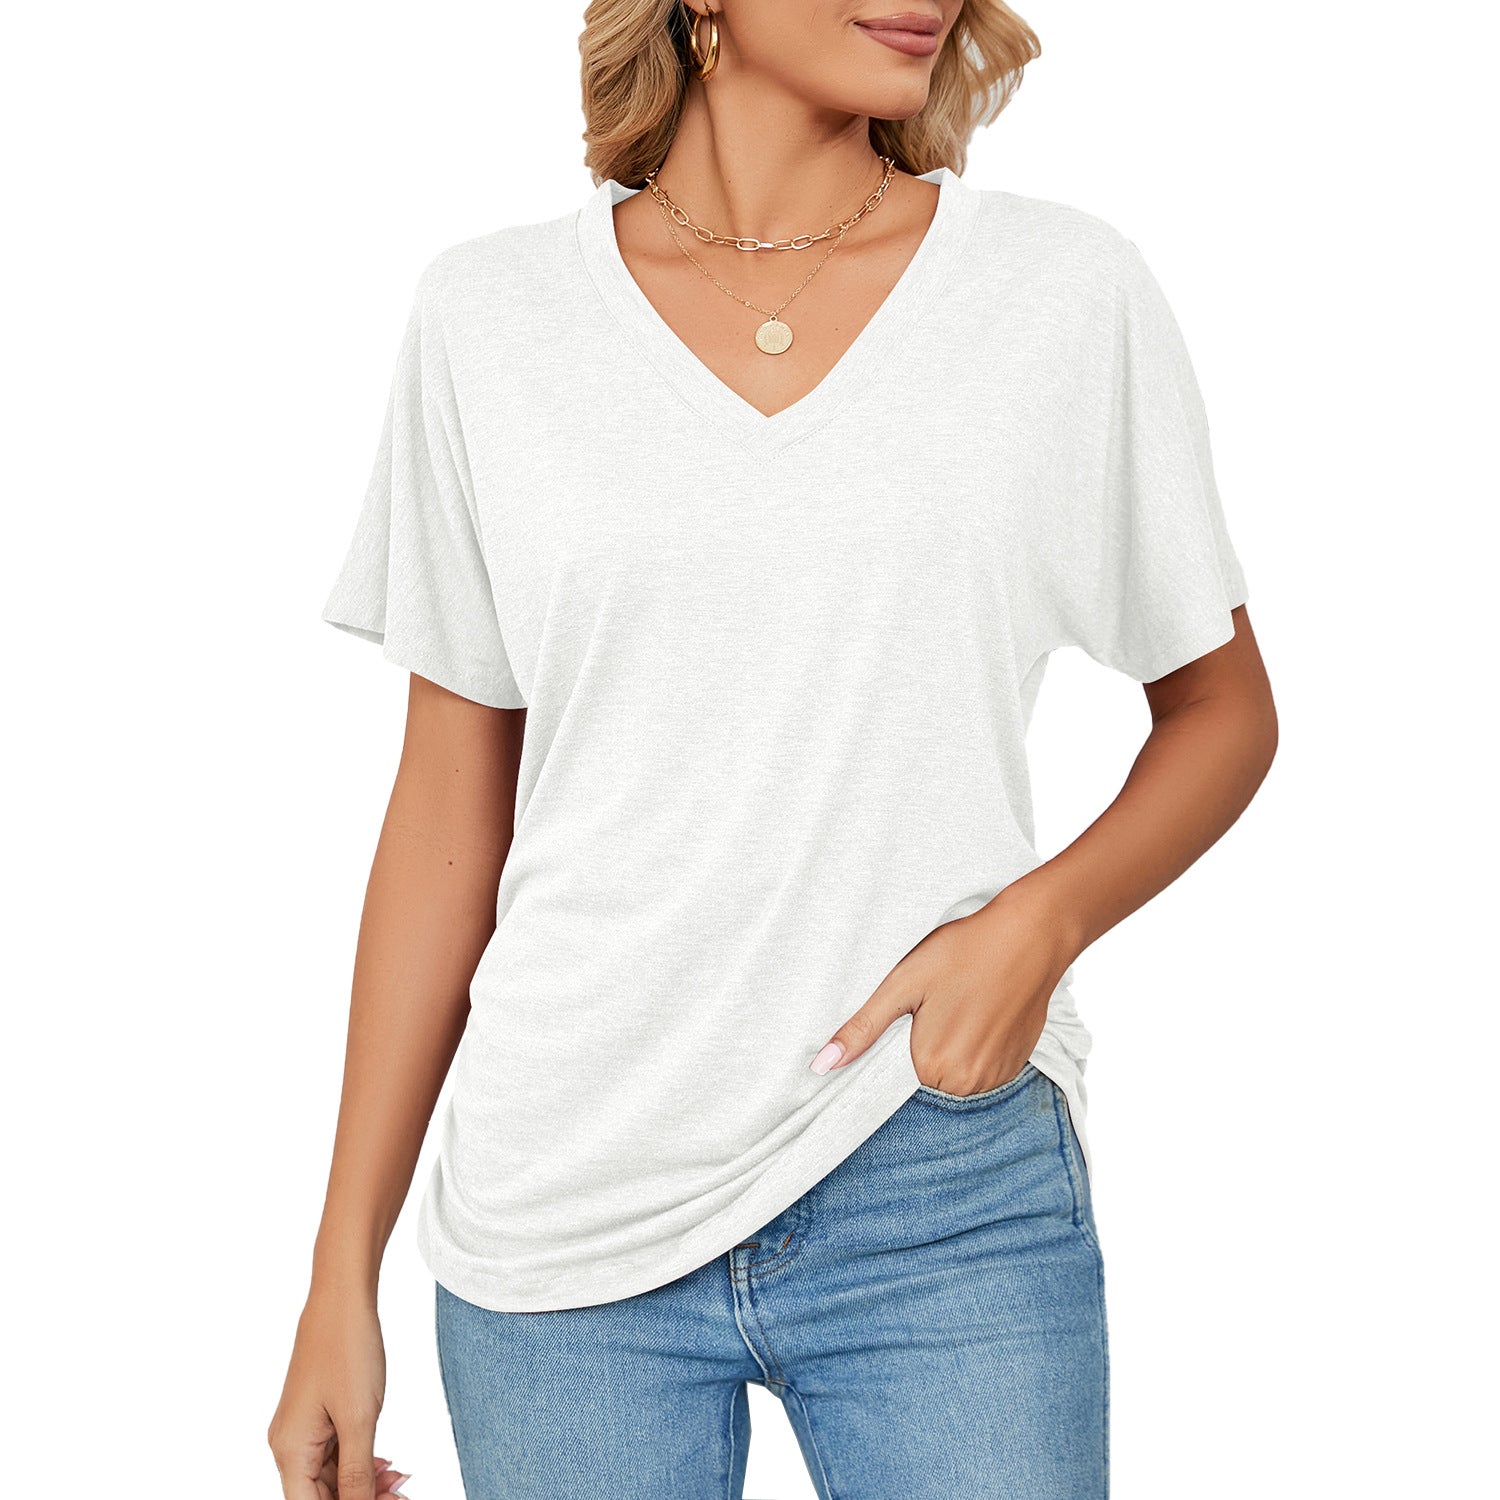 Women's Summer Leisure Pullover V-neck Solid Color Blouses